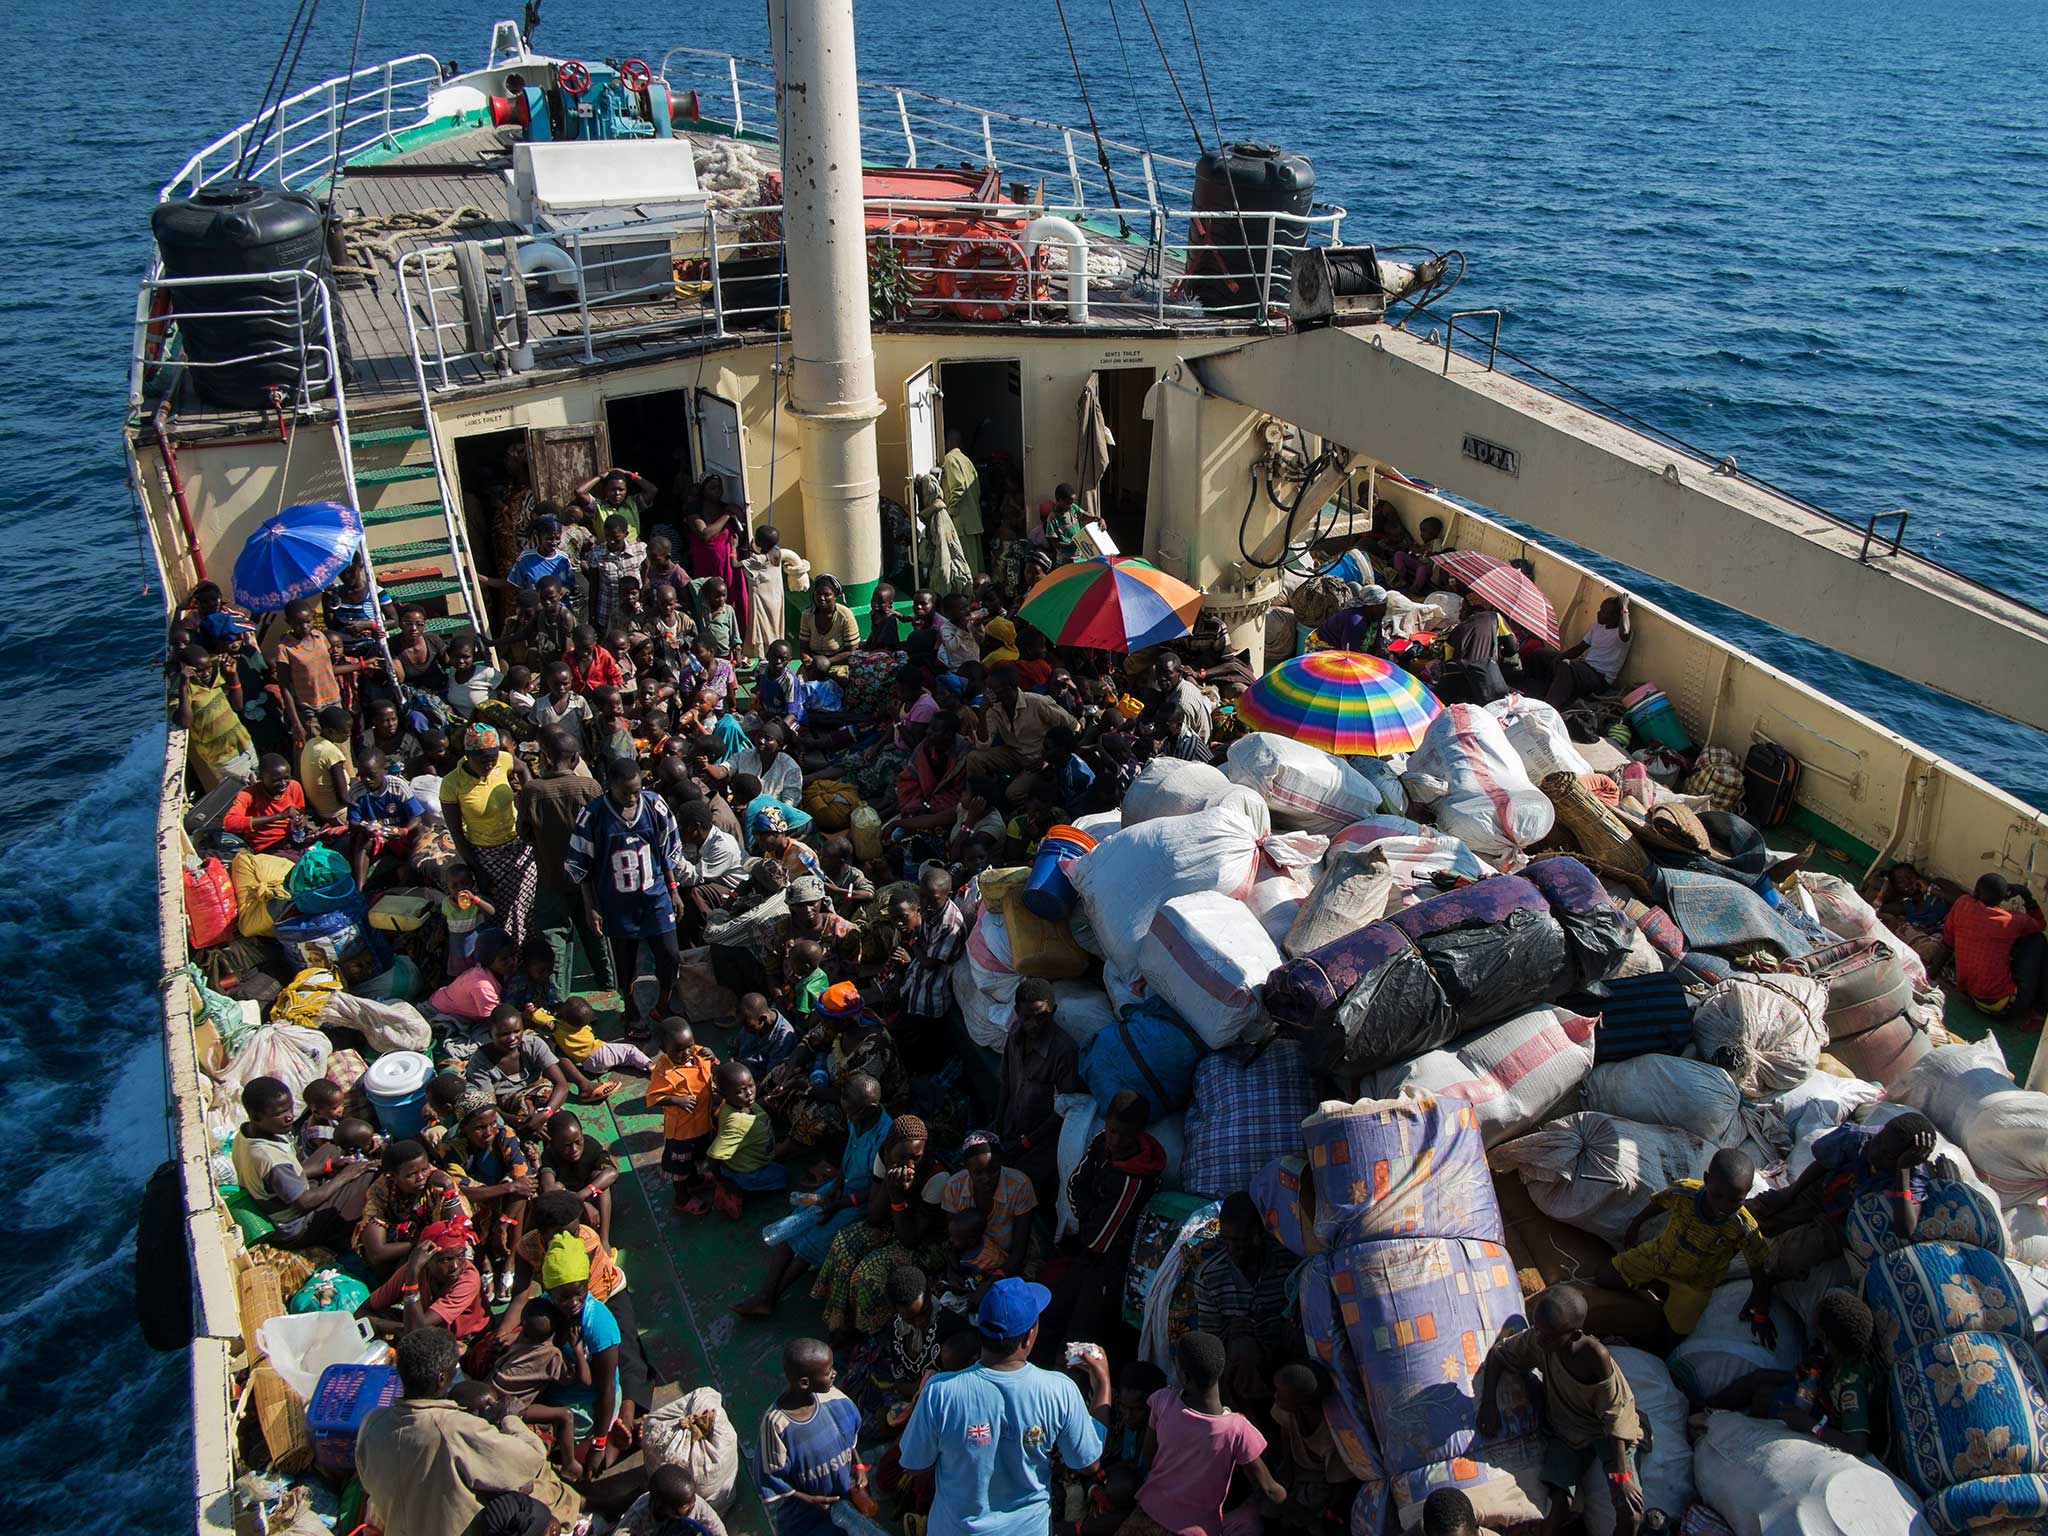 Burundian refugees are transported aboard the MV Liemba passenger cargo, on May 21, 2015